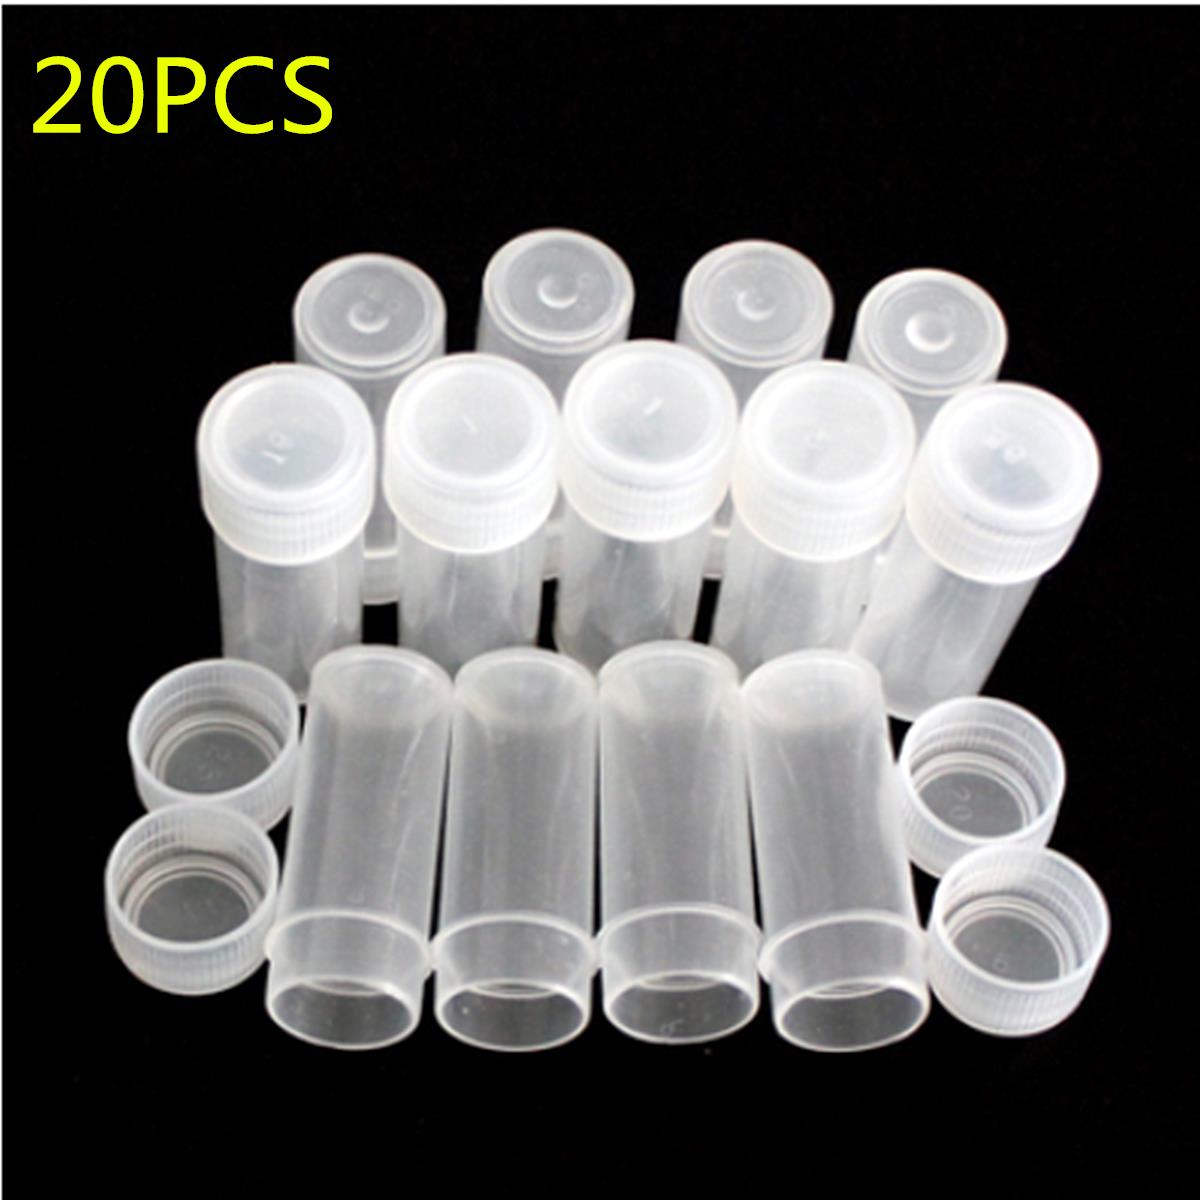 20Pcs-5ml-Chemistry-Plastic-Test-Tube-Vials-with-Seal-Caps-Pack-Container-1300038-1